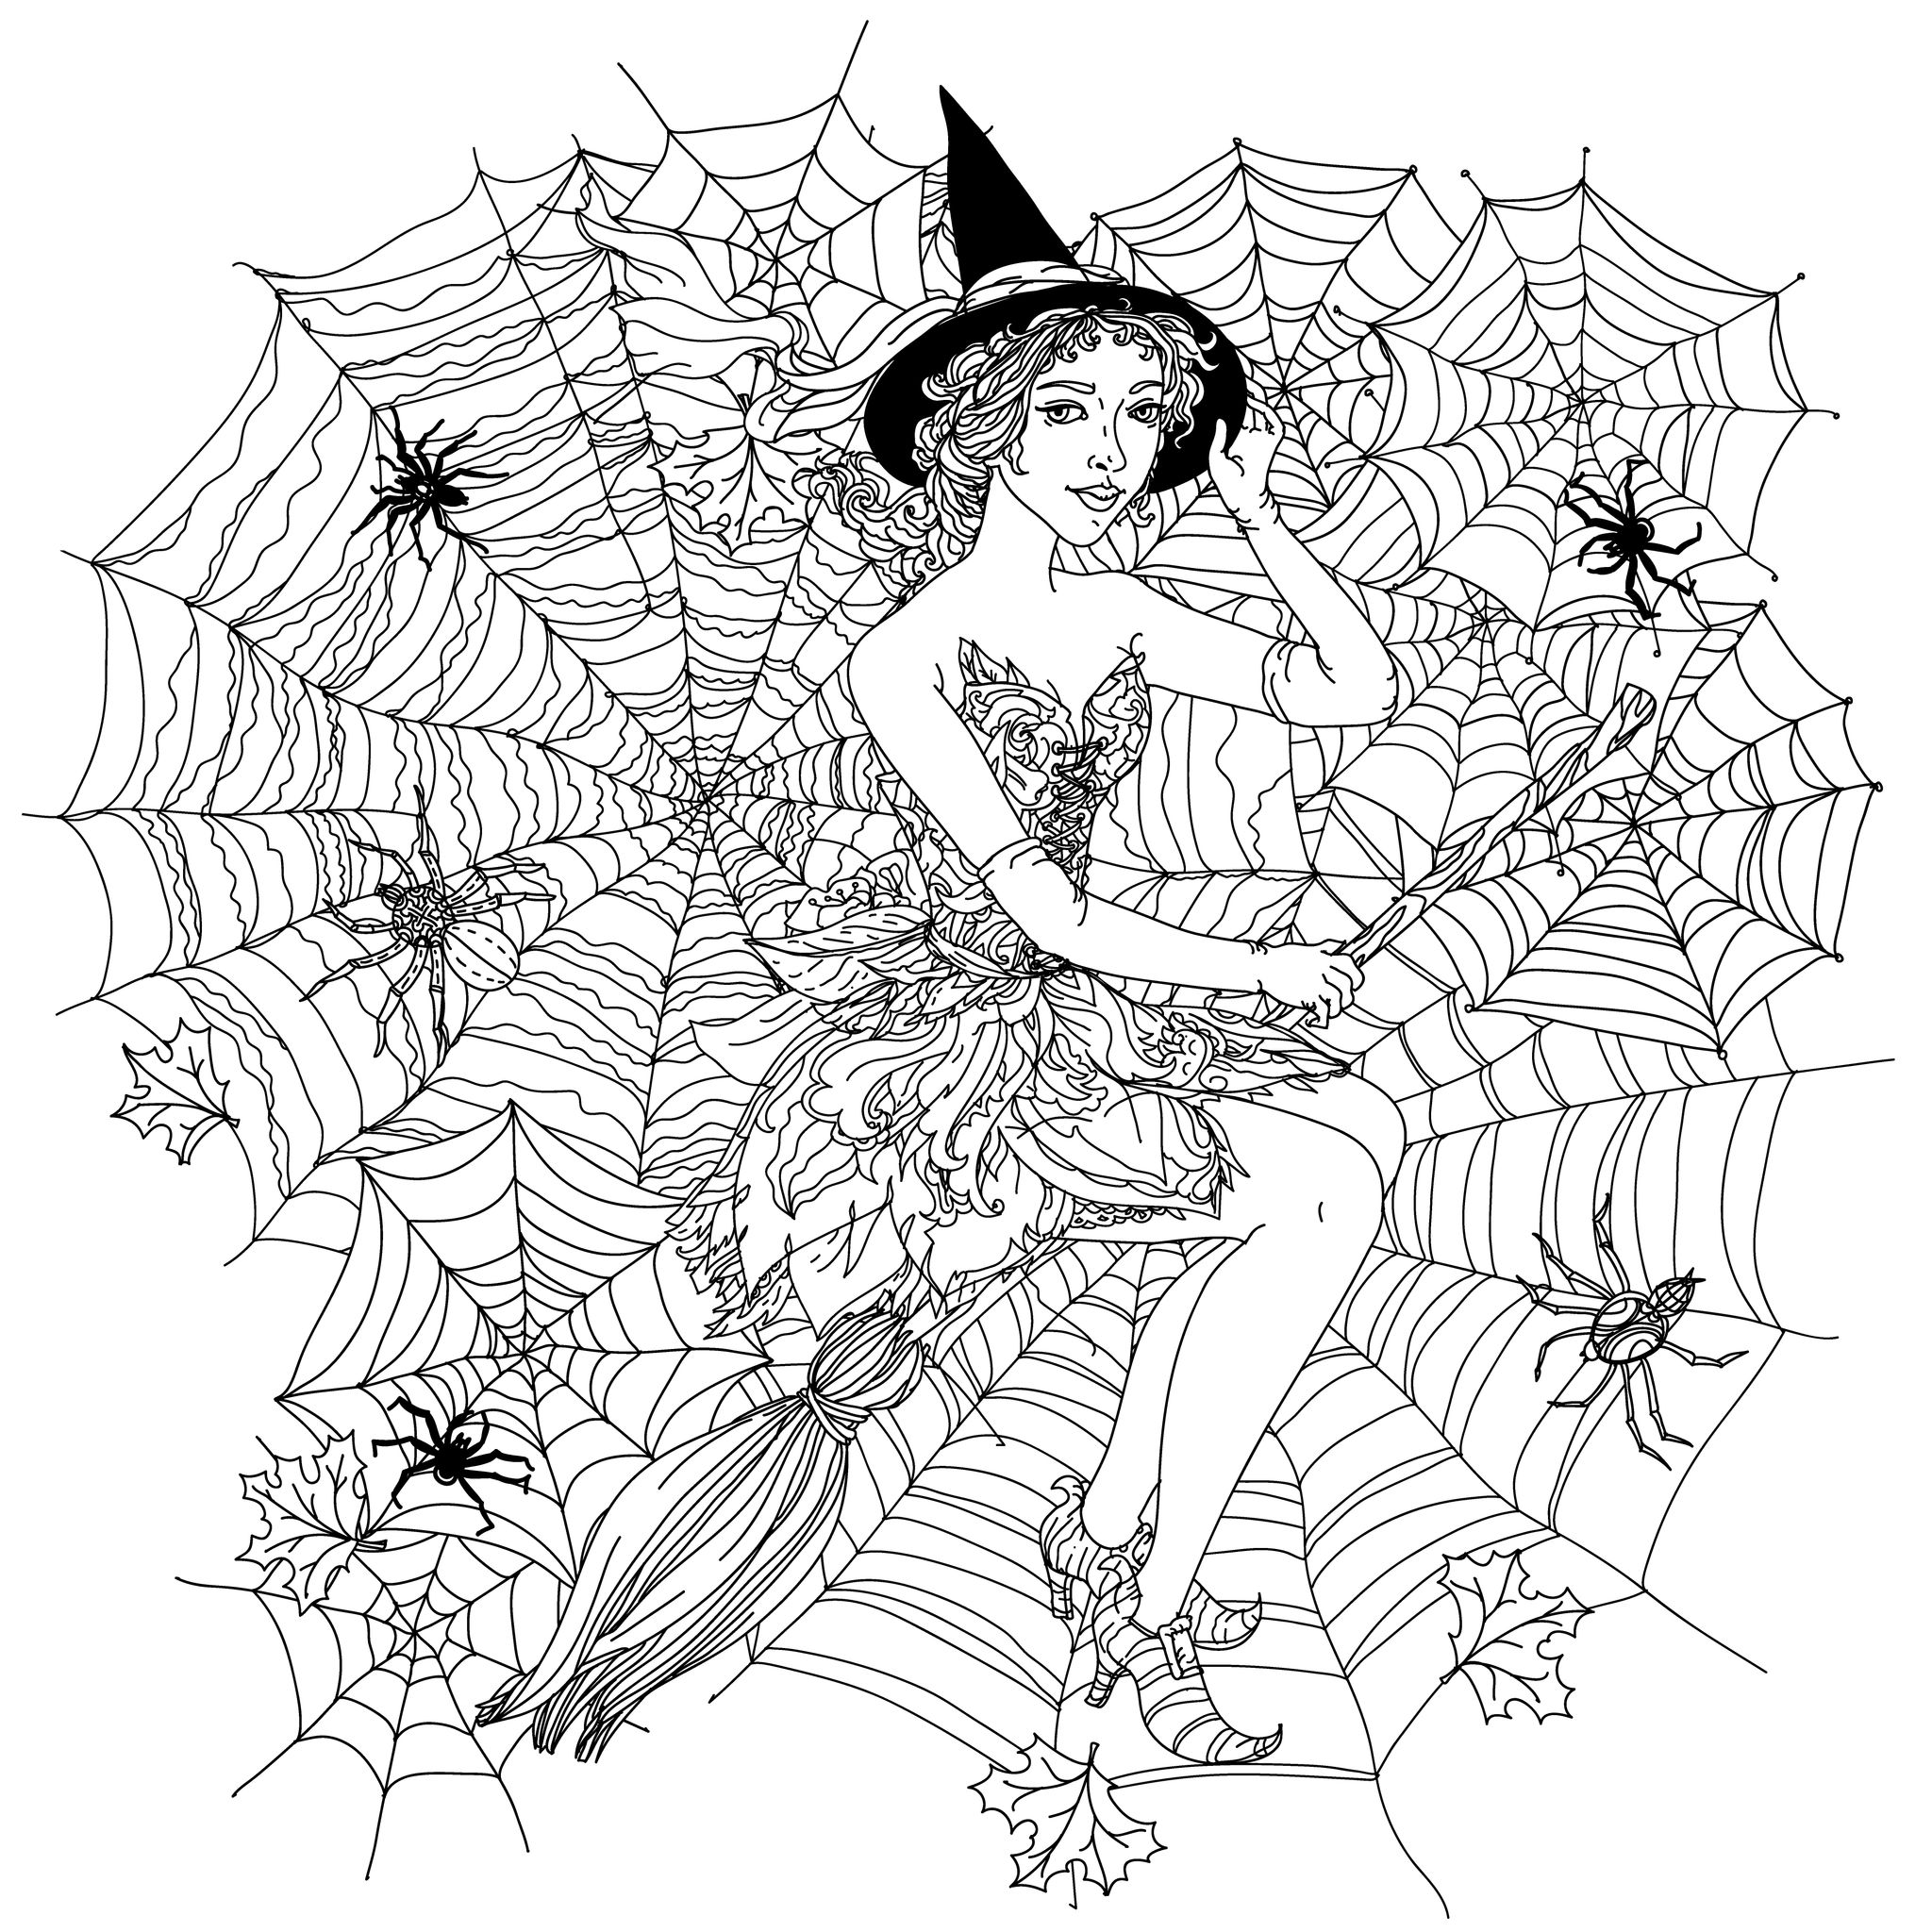 Witches and spiders